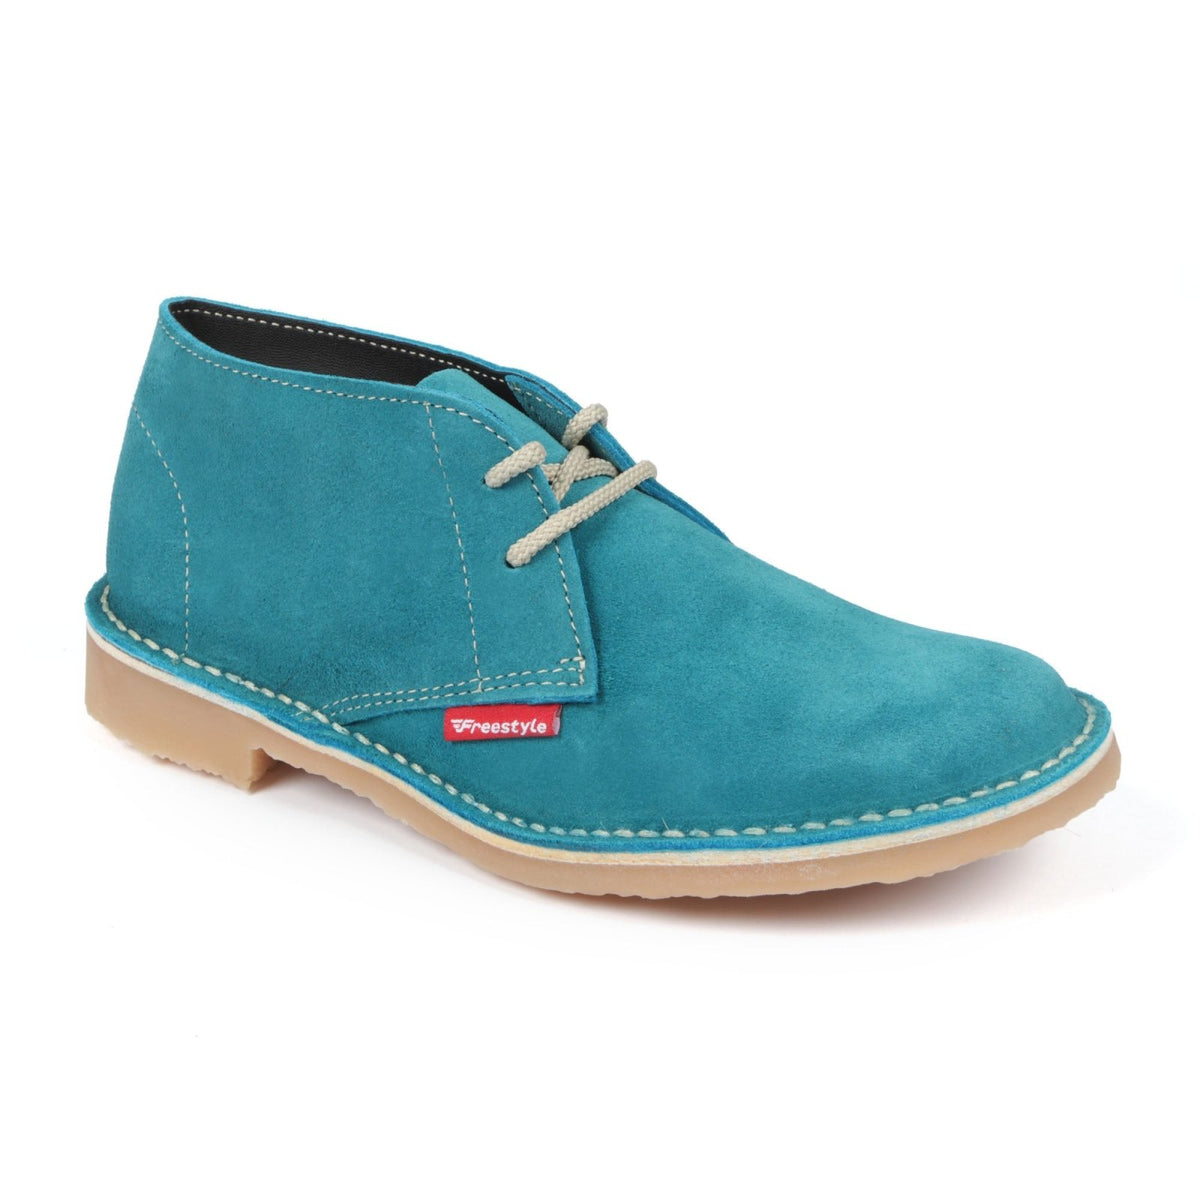 Hunter Vellie Unisex Premium Suede - Turquoise - Freestyle SA Proudly local vellies leather boots veldskoens vellies leather shoes suede veldskoens